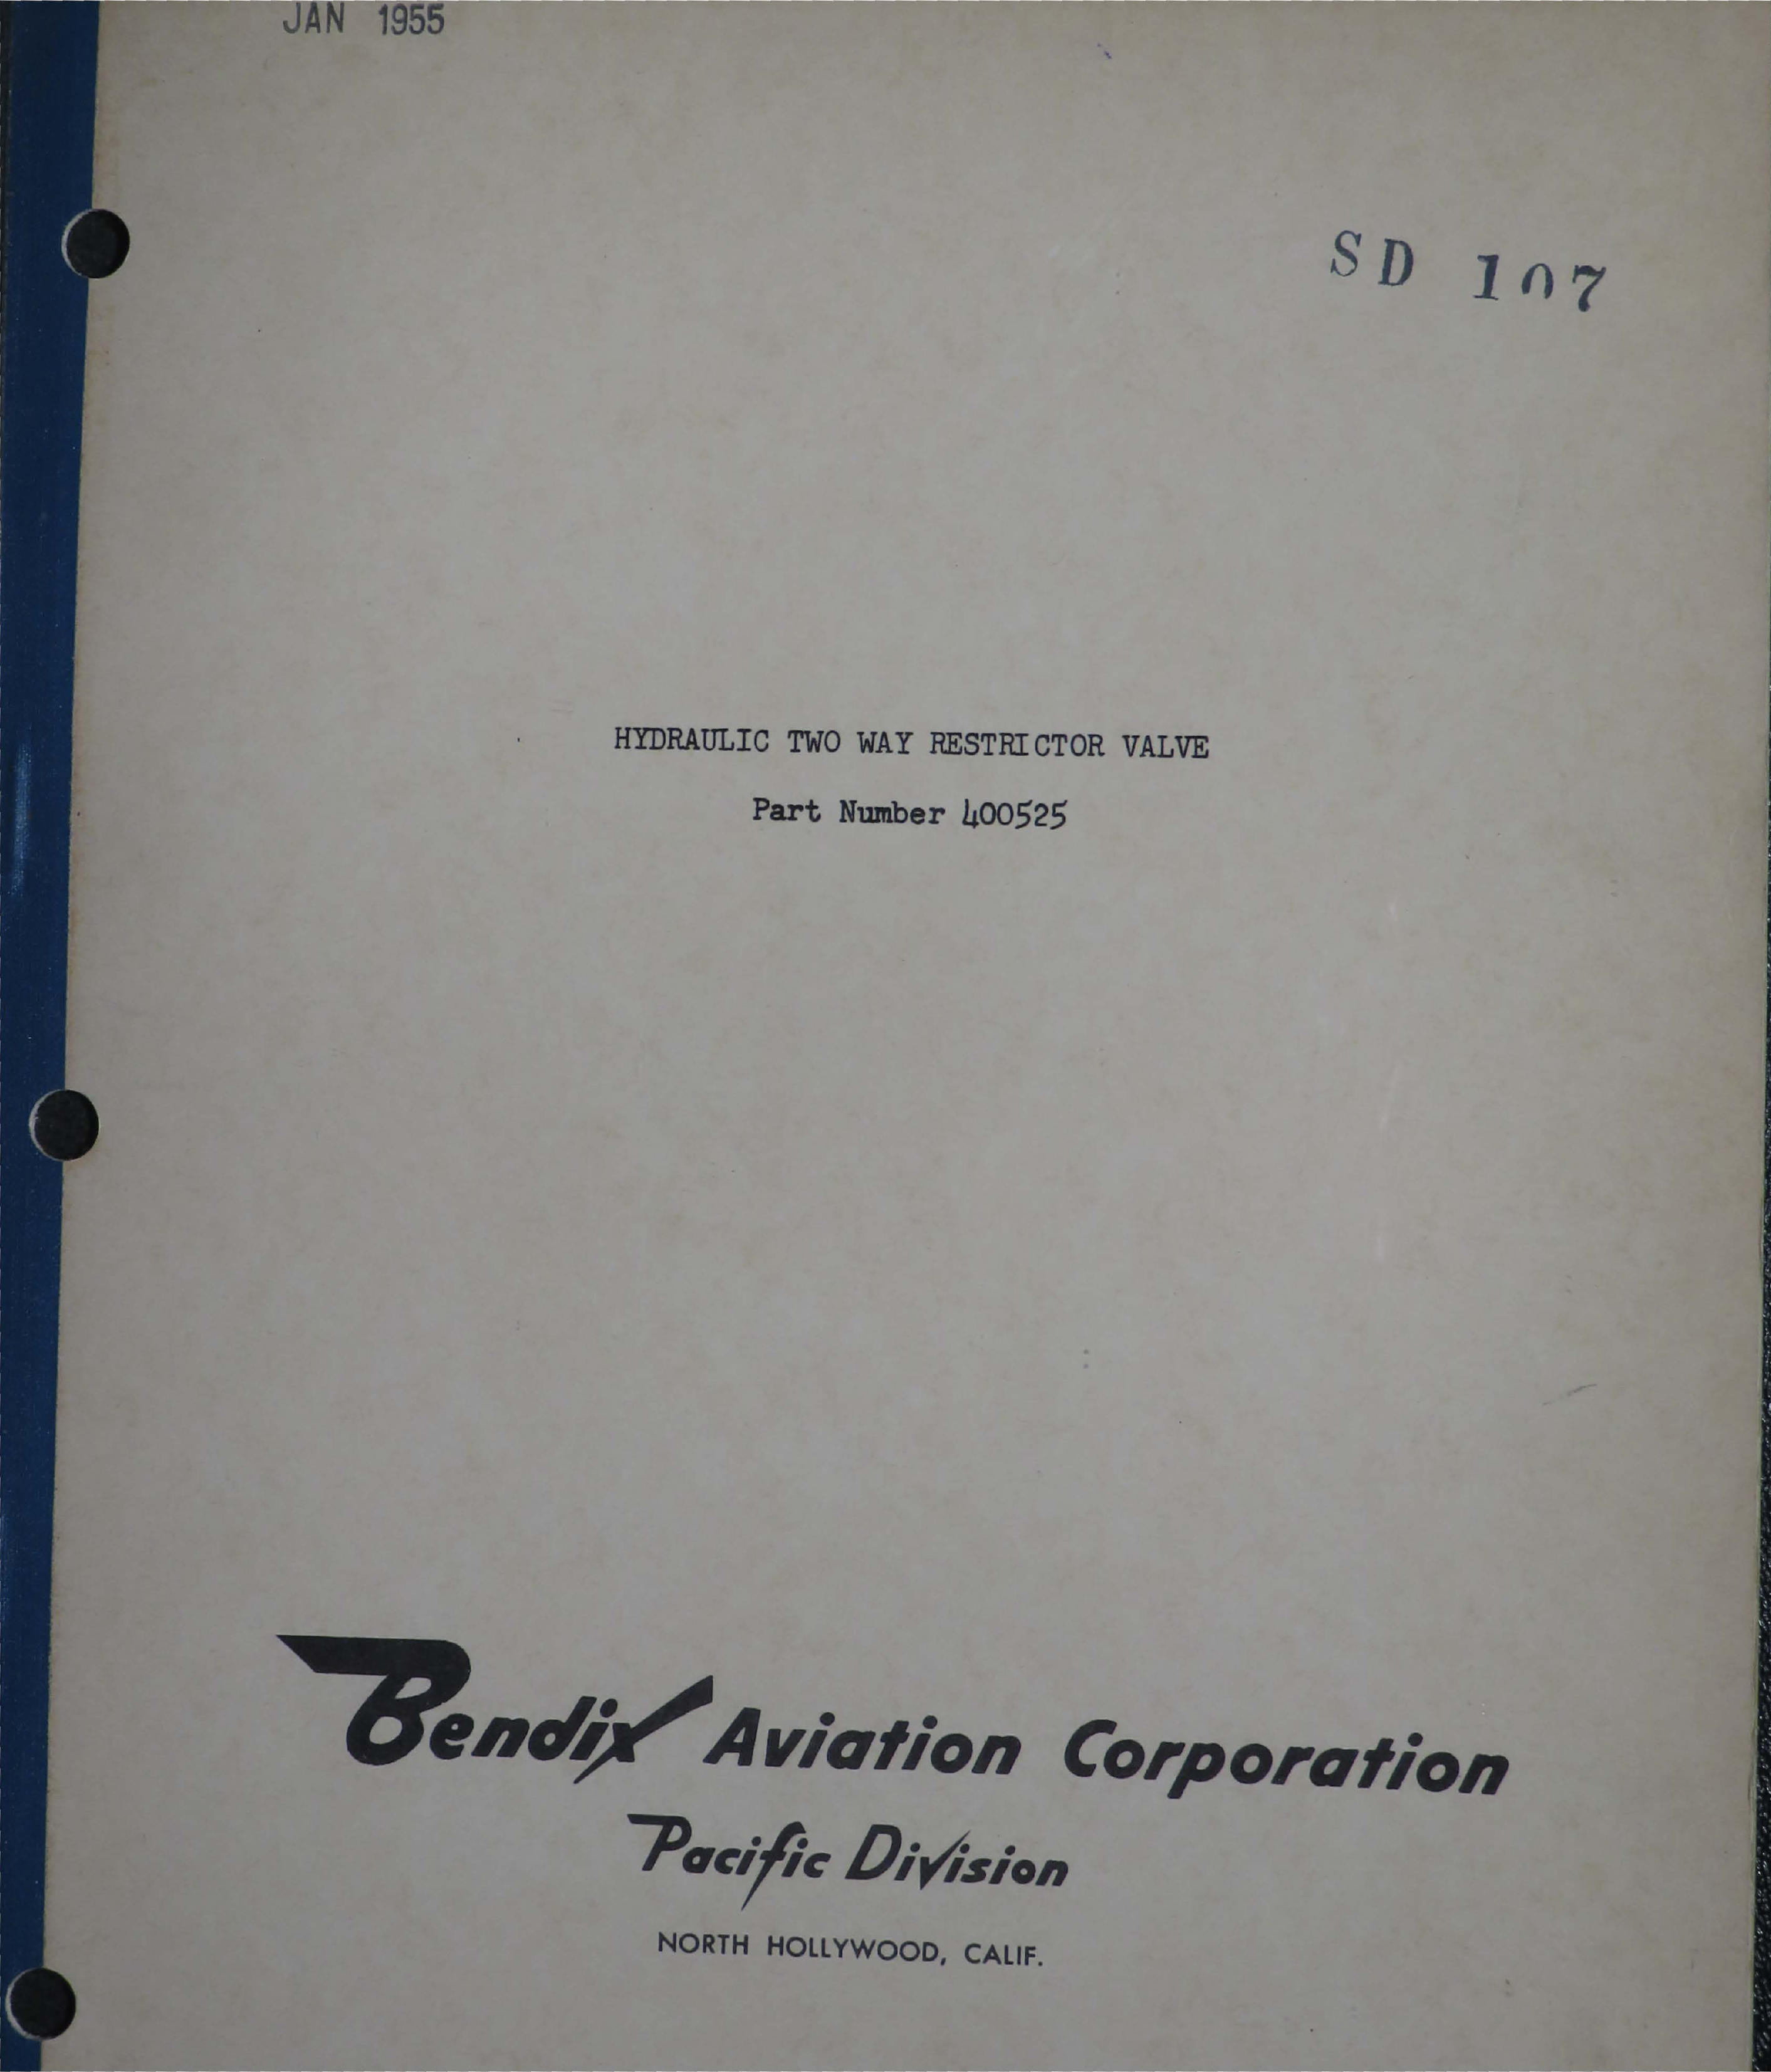 Sample page 1 from AirCorps Library document: Hydraulic Two Way Restrictor Valve - Part 400525 